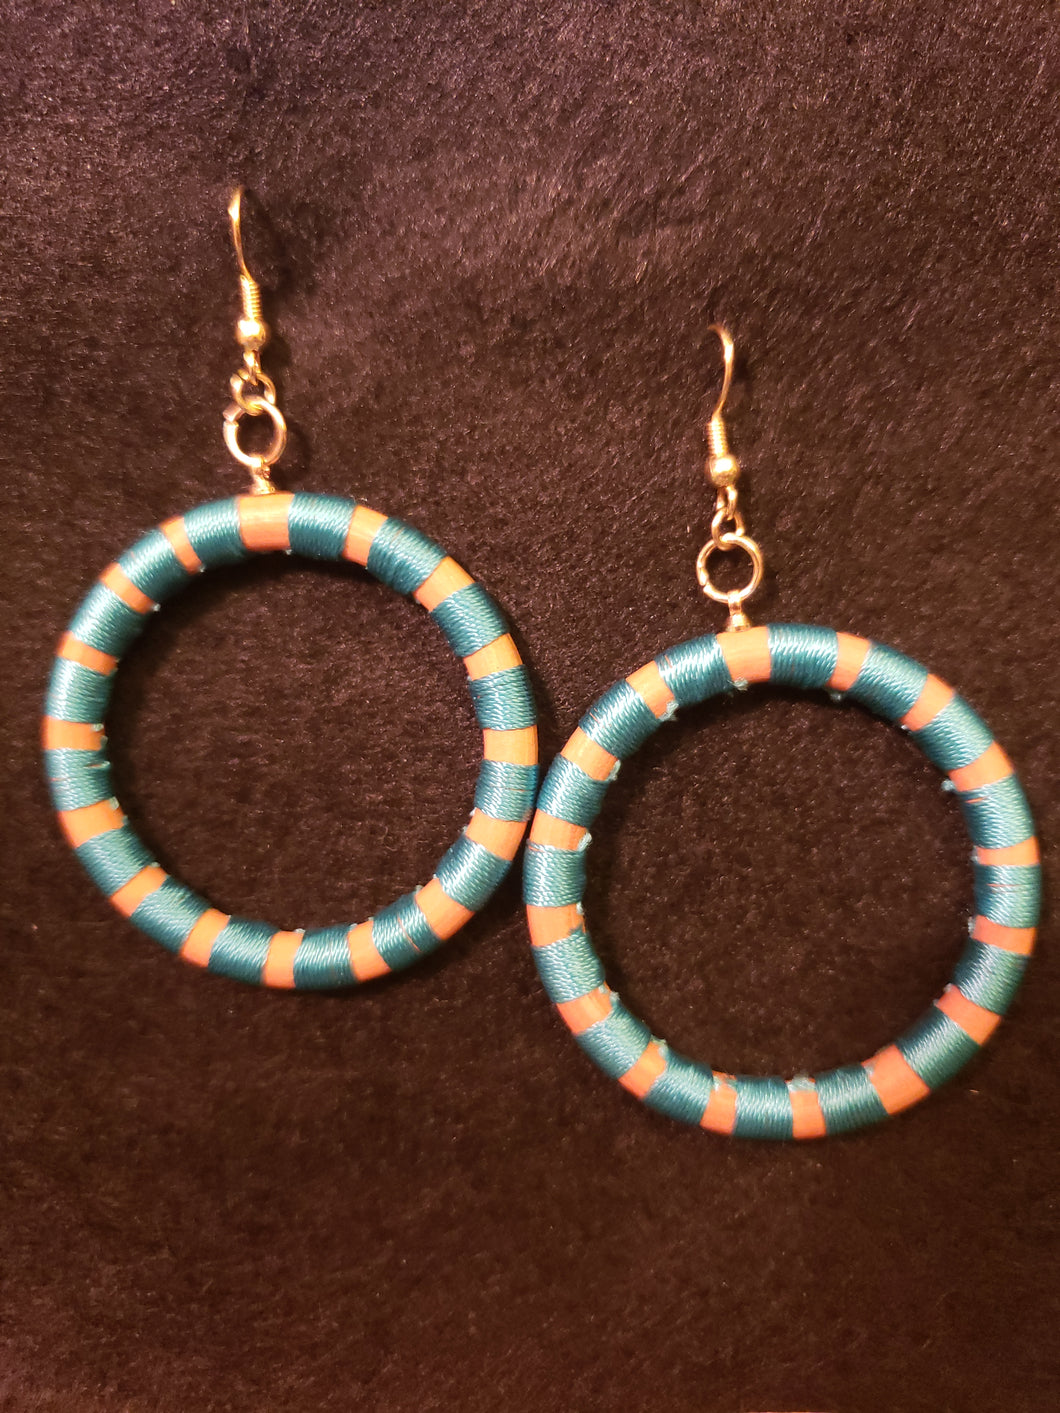 Teal wrapped ring earrings